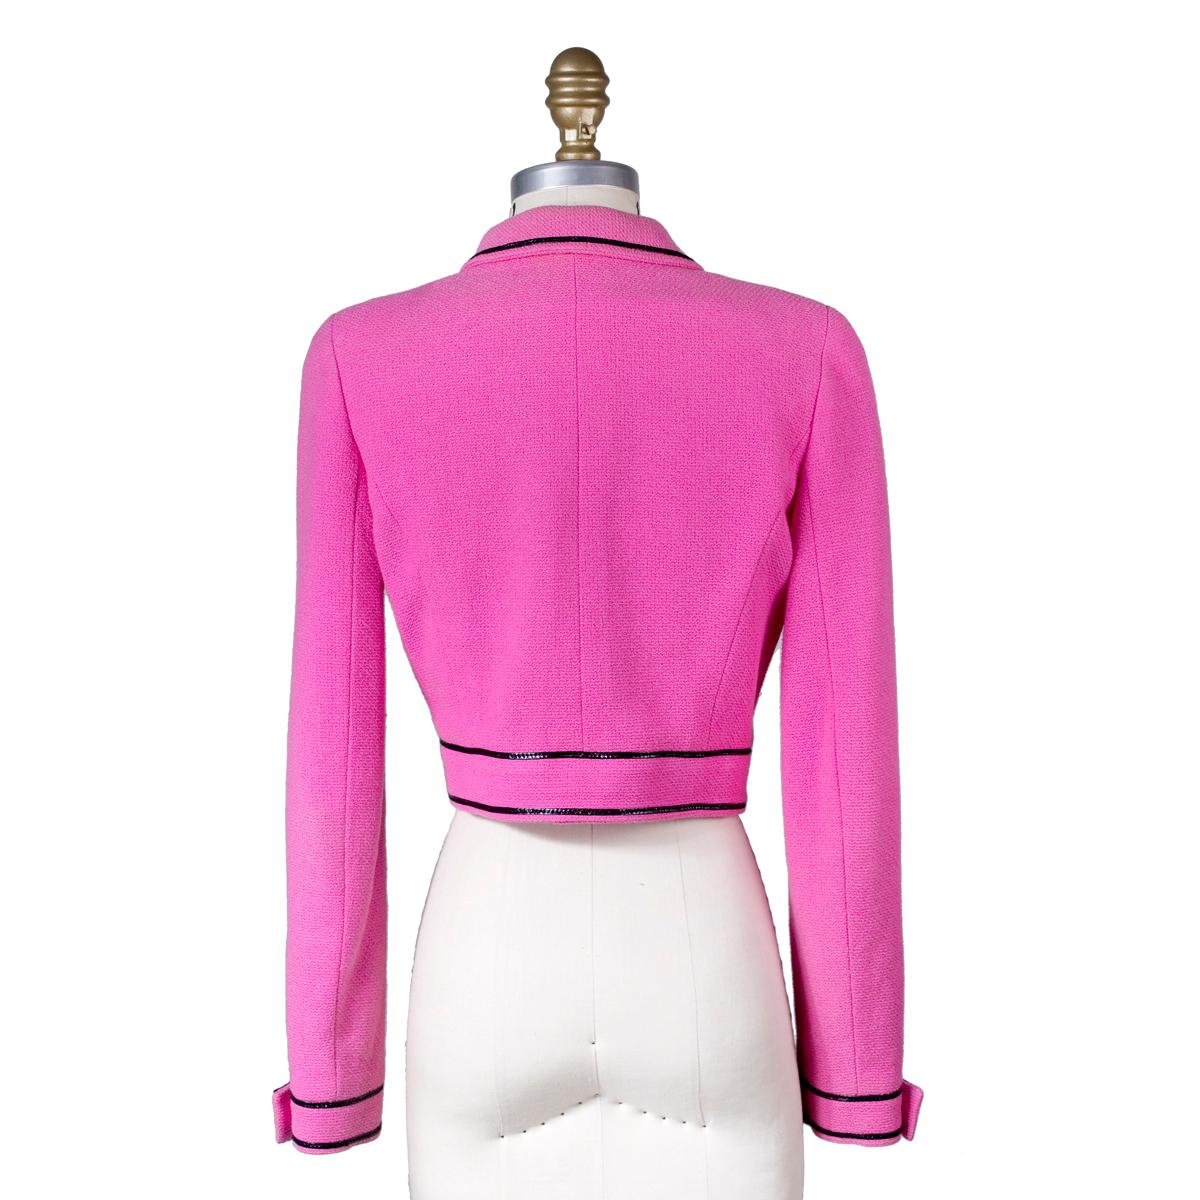 Vintage jacket from Chanel for S/S 1995-1996
Cropped bolero style fit
Hot pink wool with black patent piping details
Silk satin lining and gold chain detail inside along bottom hem
Condition: Excellent
Size/Measurements:
Size 34 approximately 
15